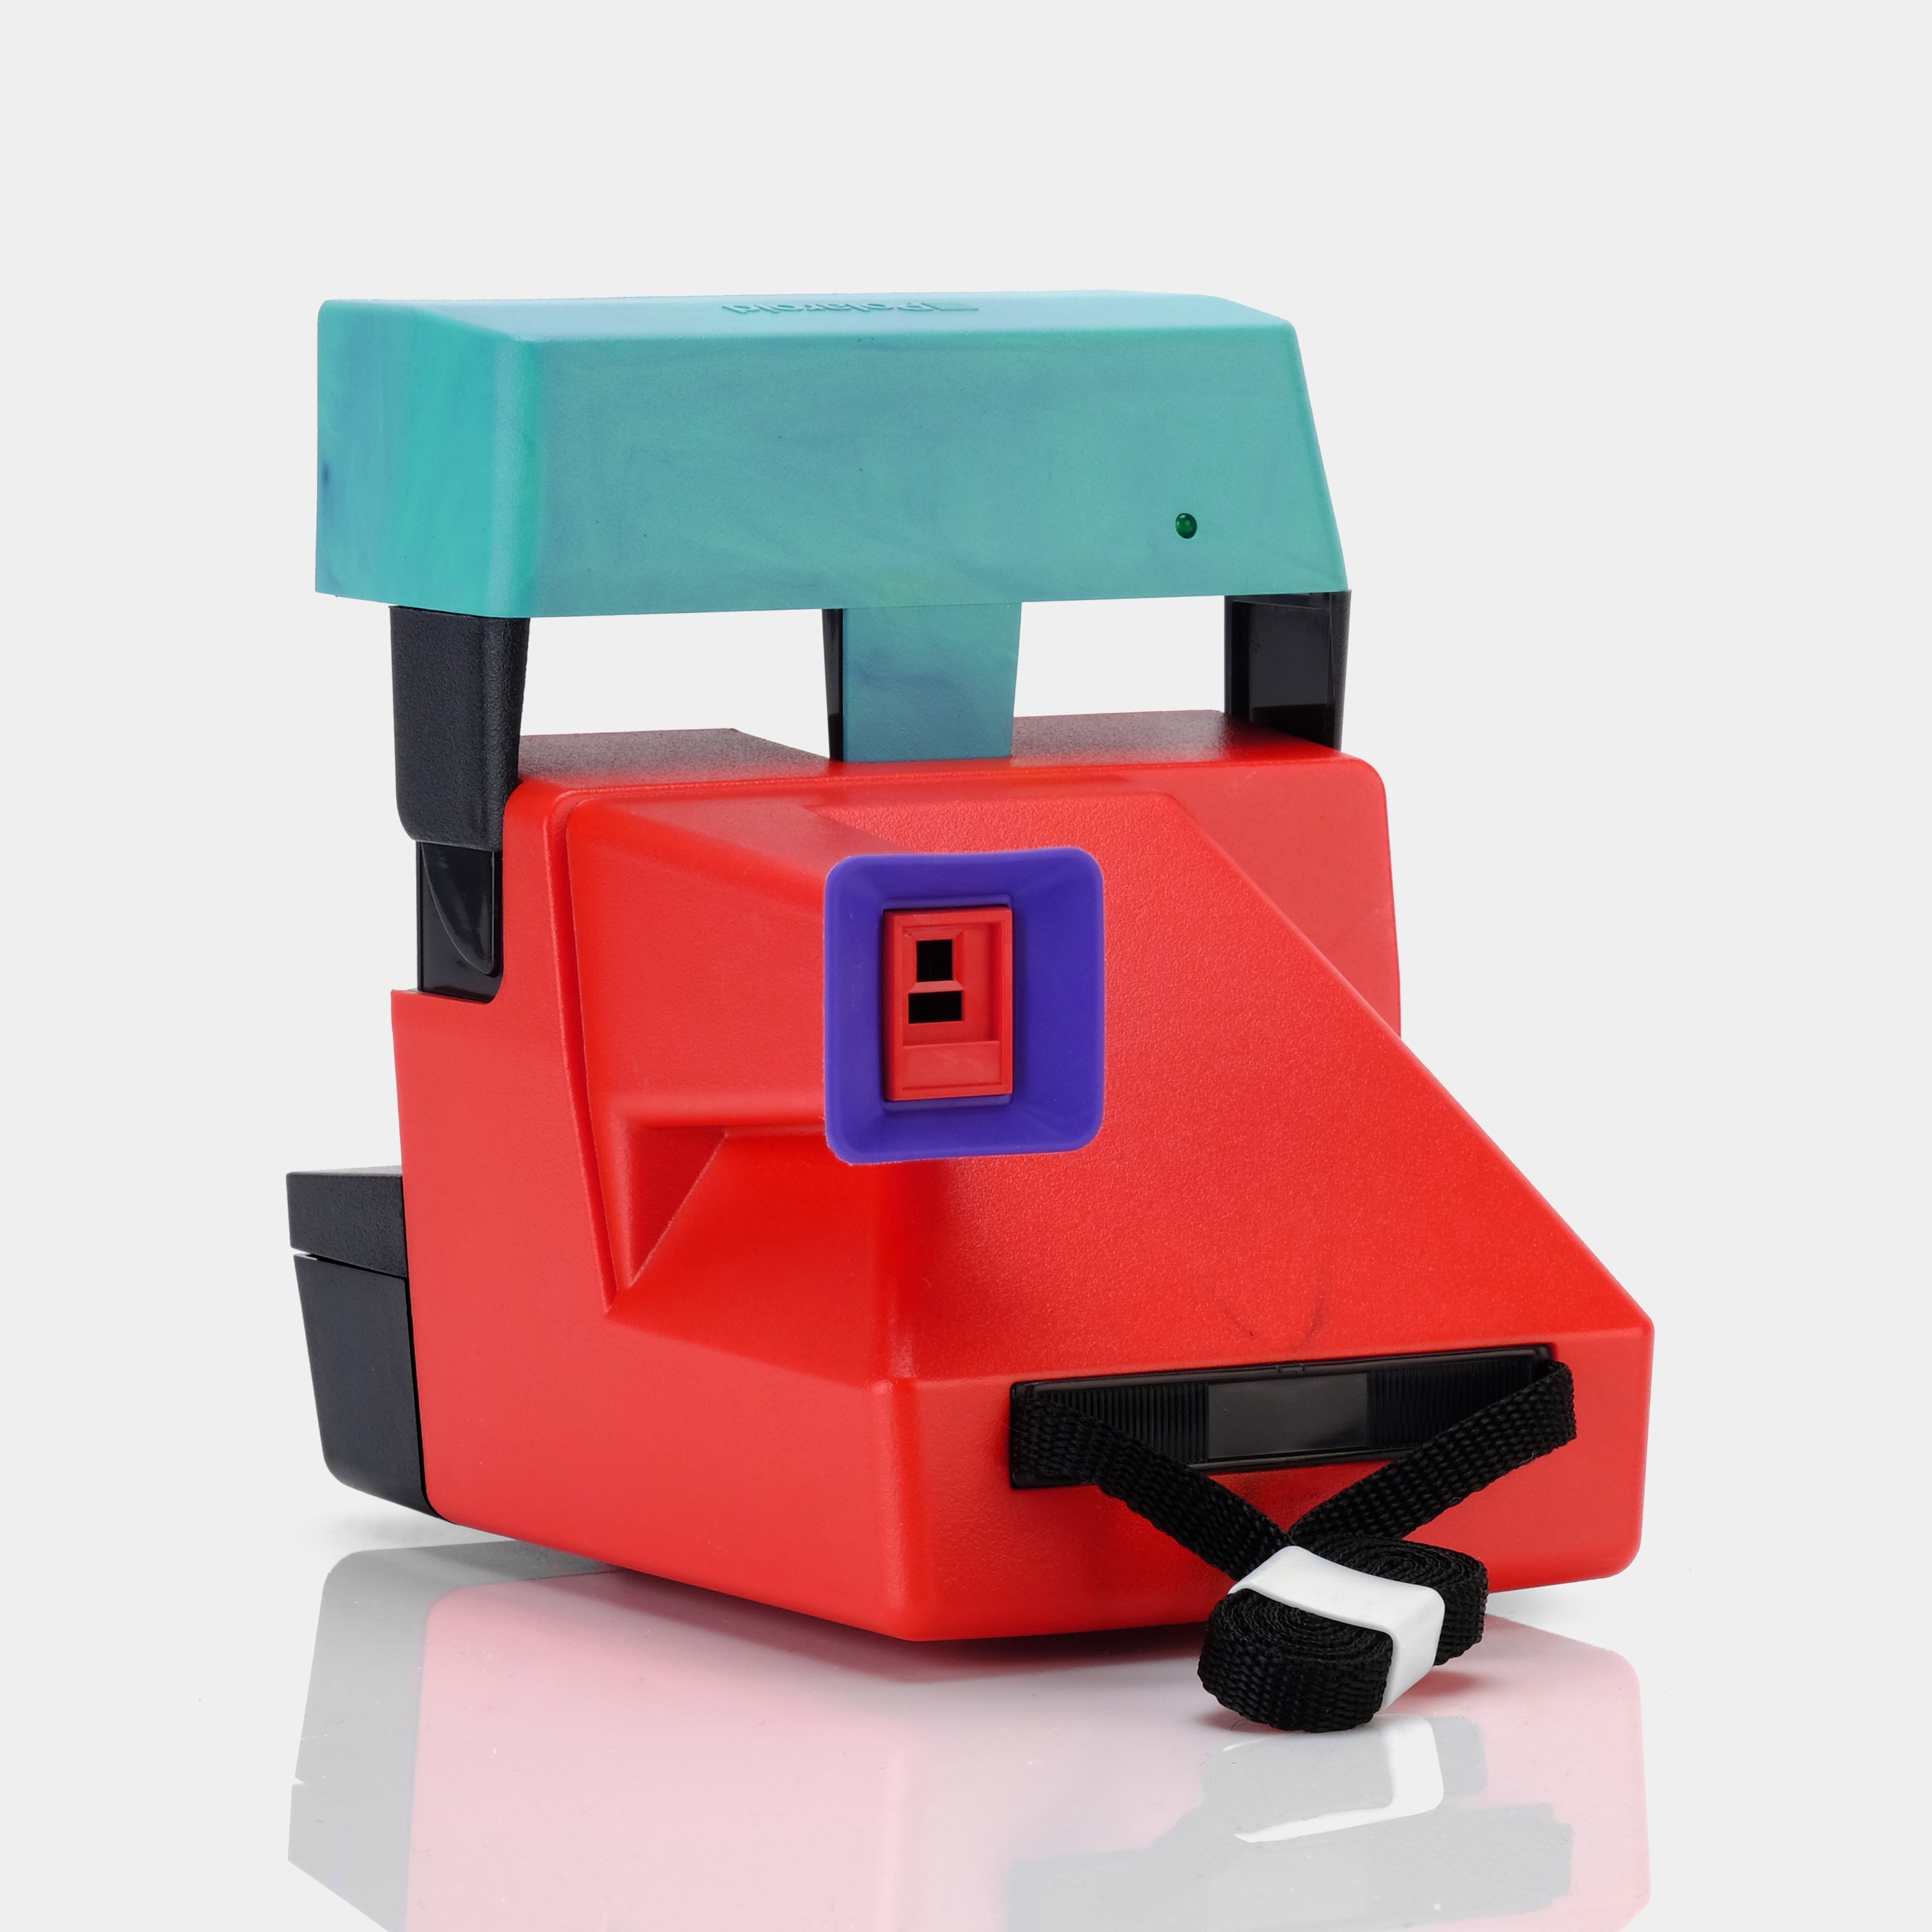 Red, Turquoise and Black Swirl 600 Instant Film Camera